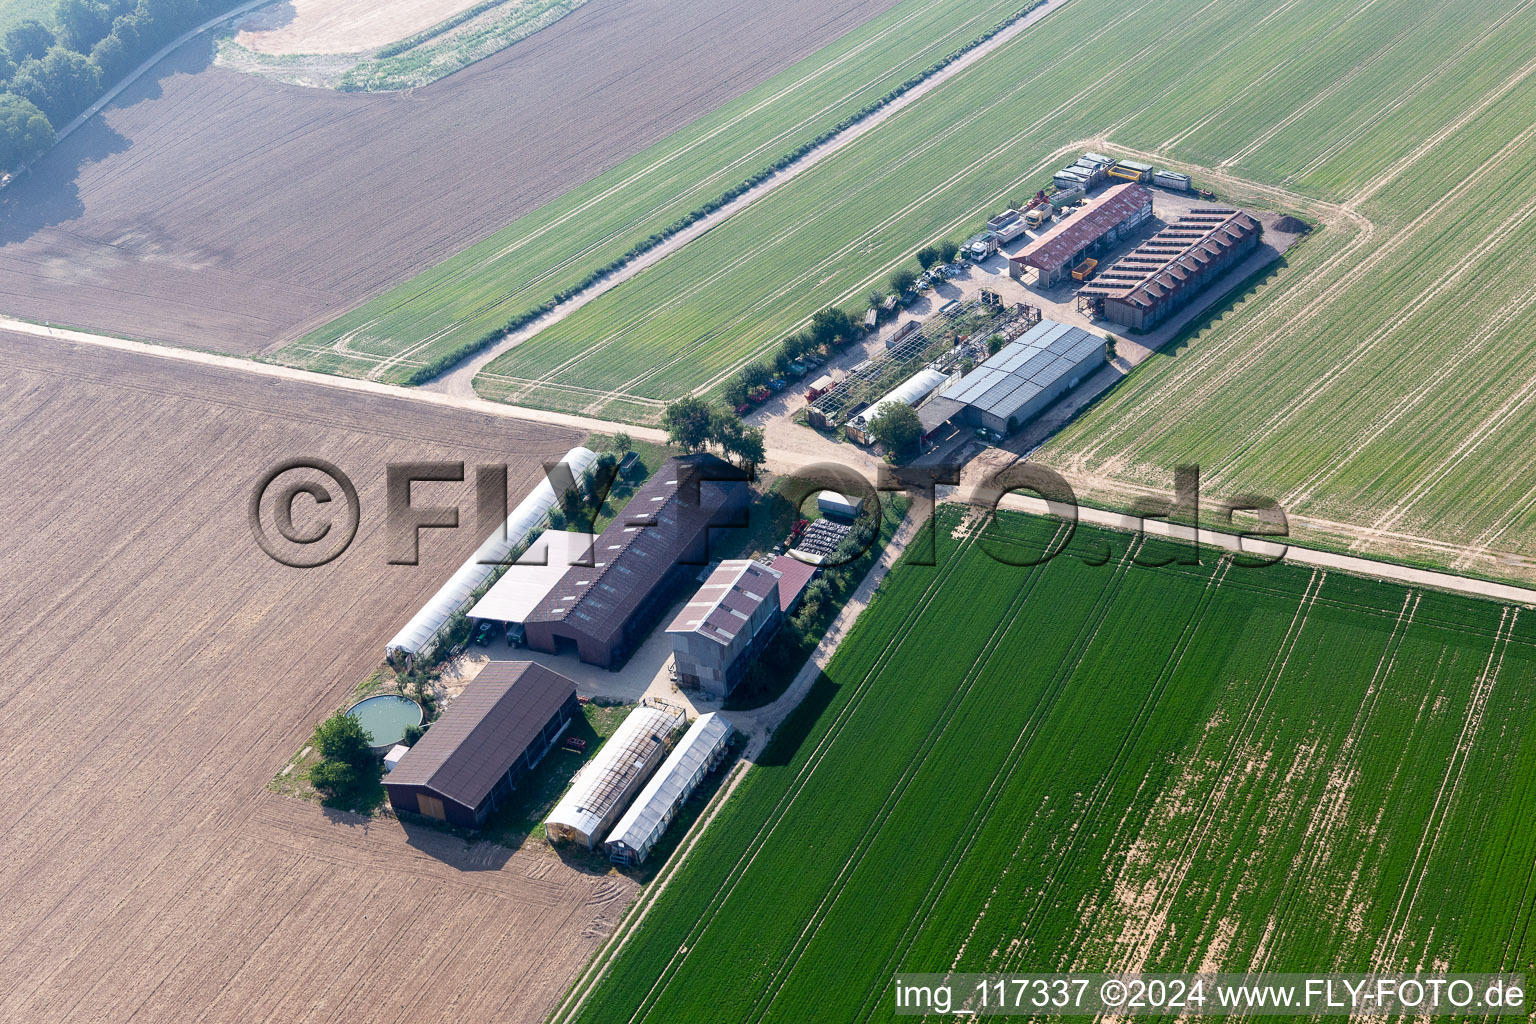 Aerial photograpy of Aussiedlerhof in Kandel in the state Rhineland-Palatinate, Germany